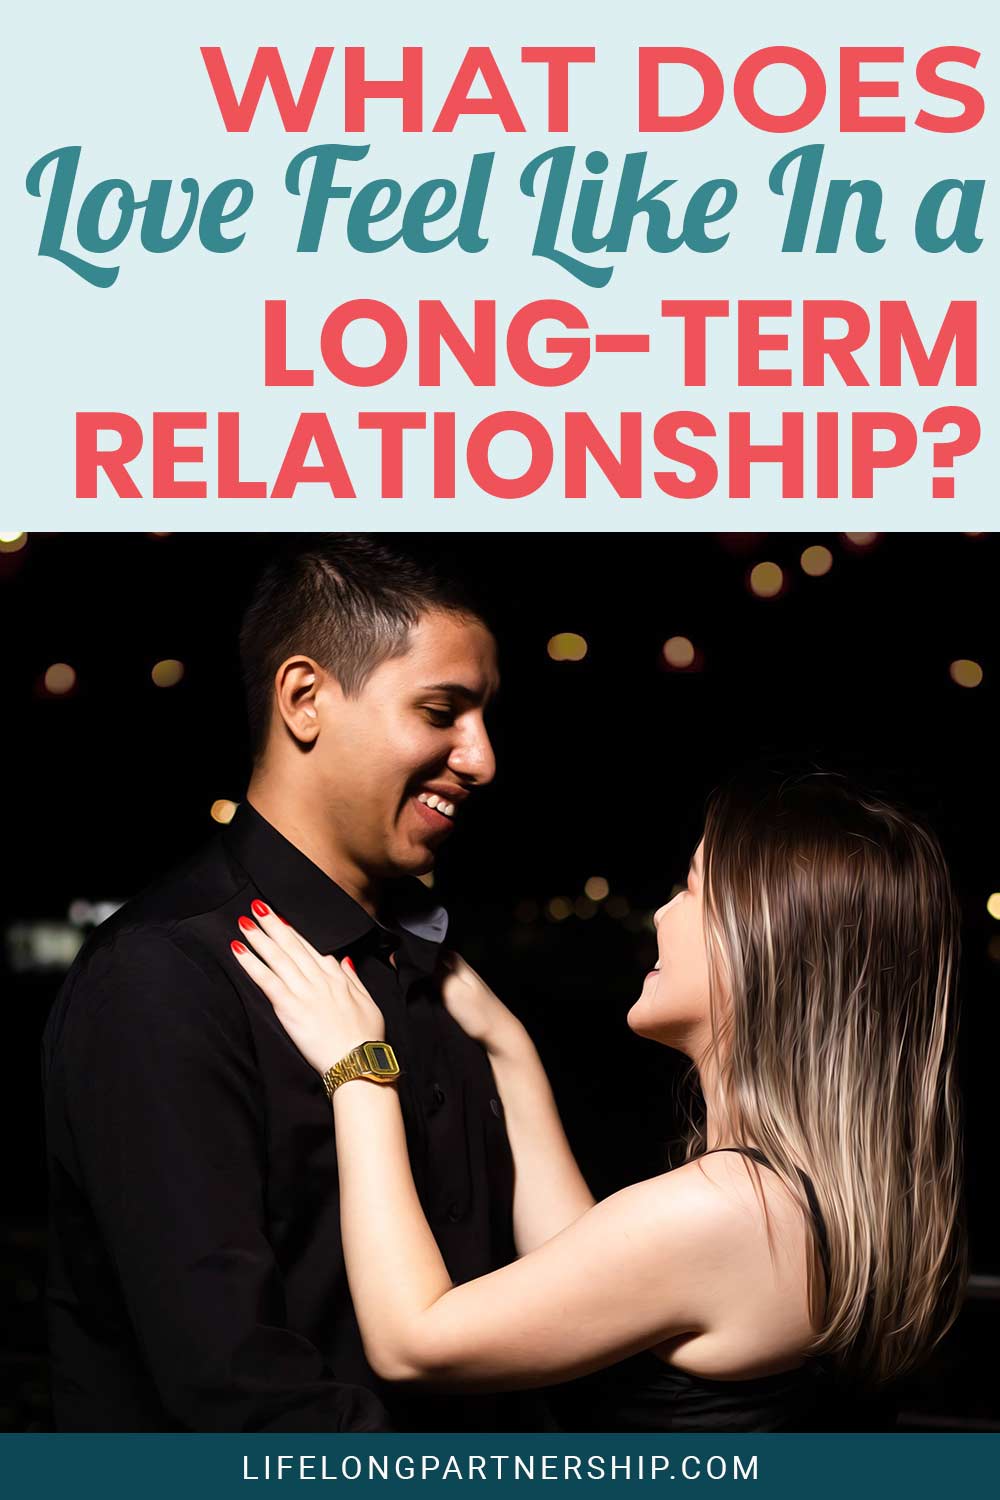 What Does Love Feel Like In a Long-Term Relationship?